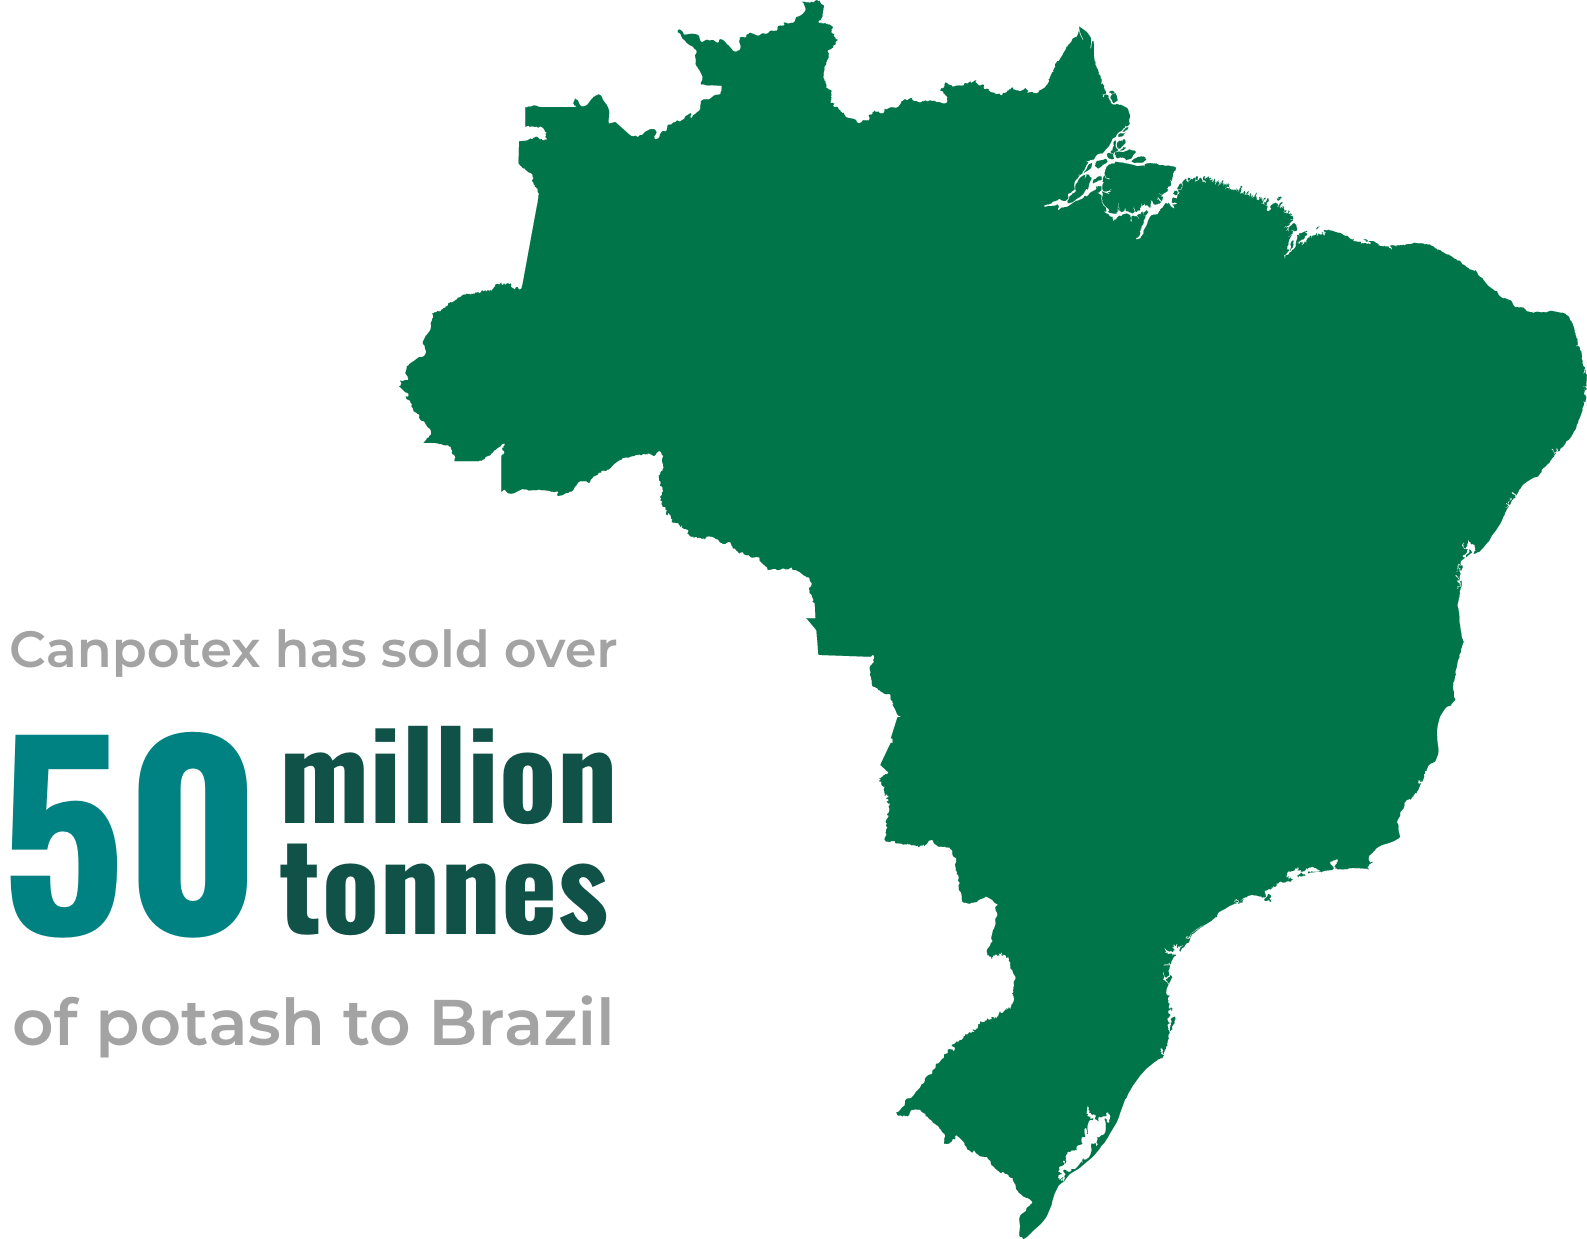 Canpotex has sold over 50 million tonnes of potach to Brazil